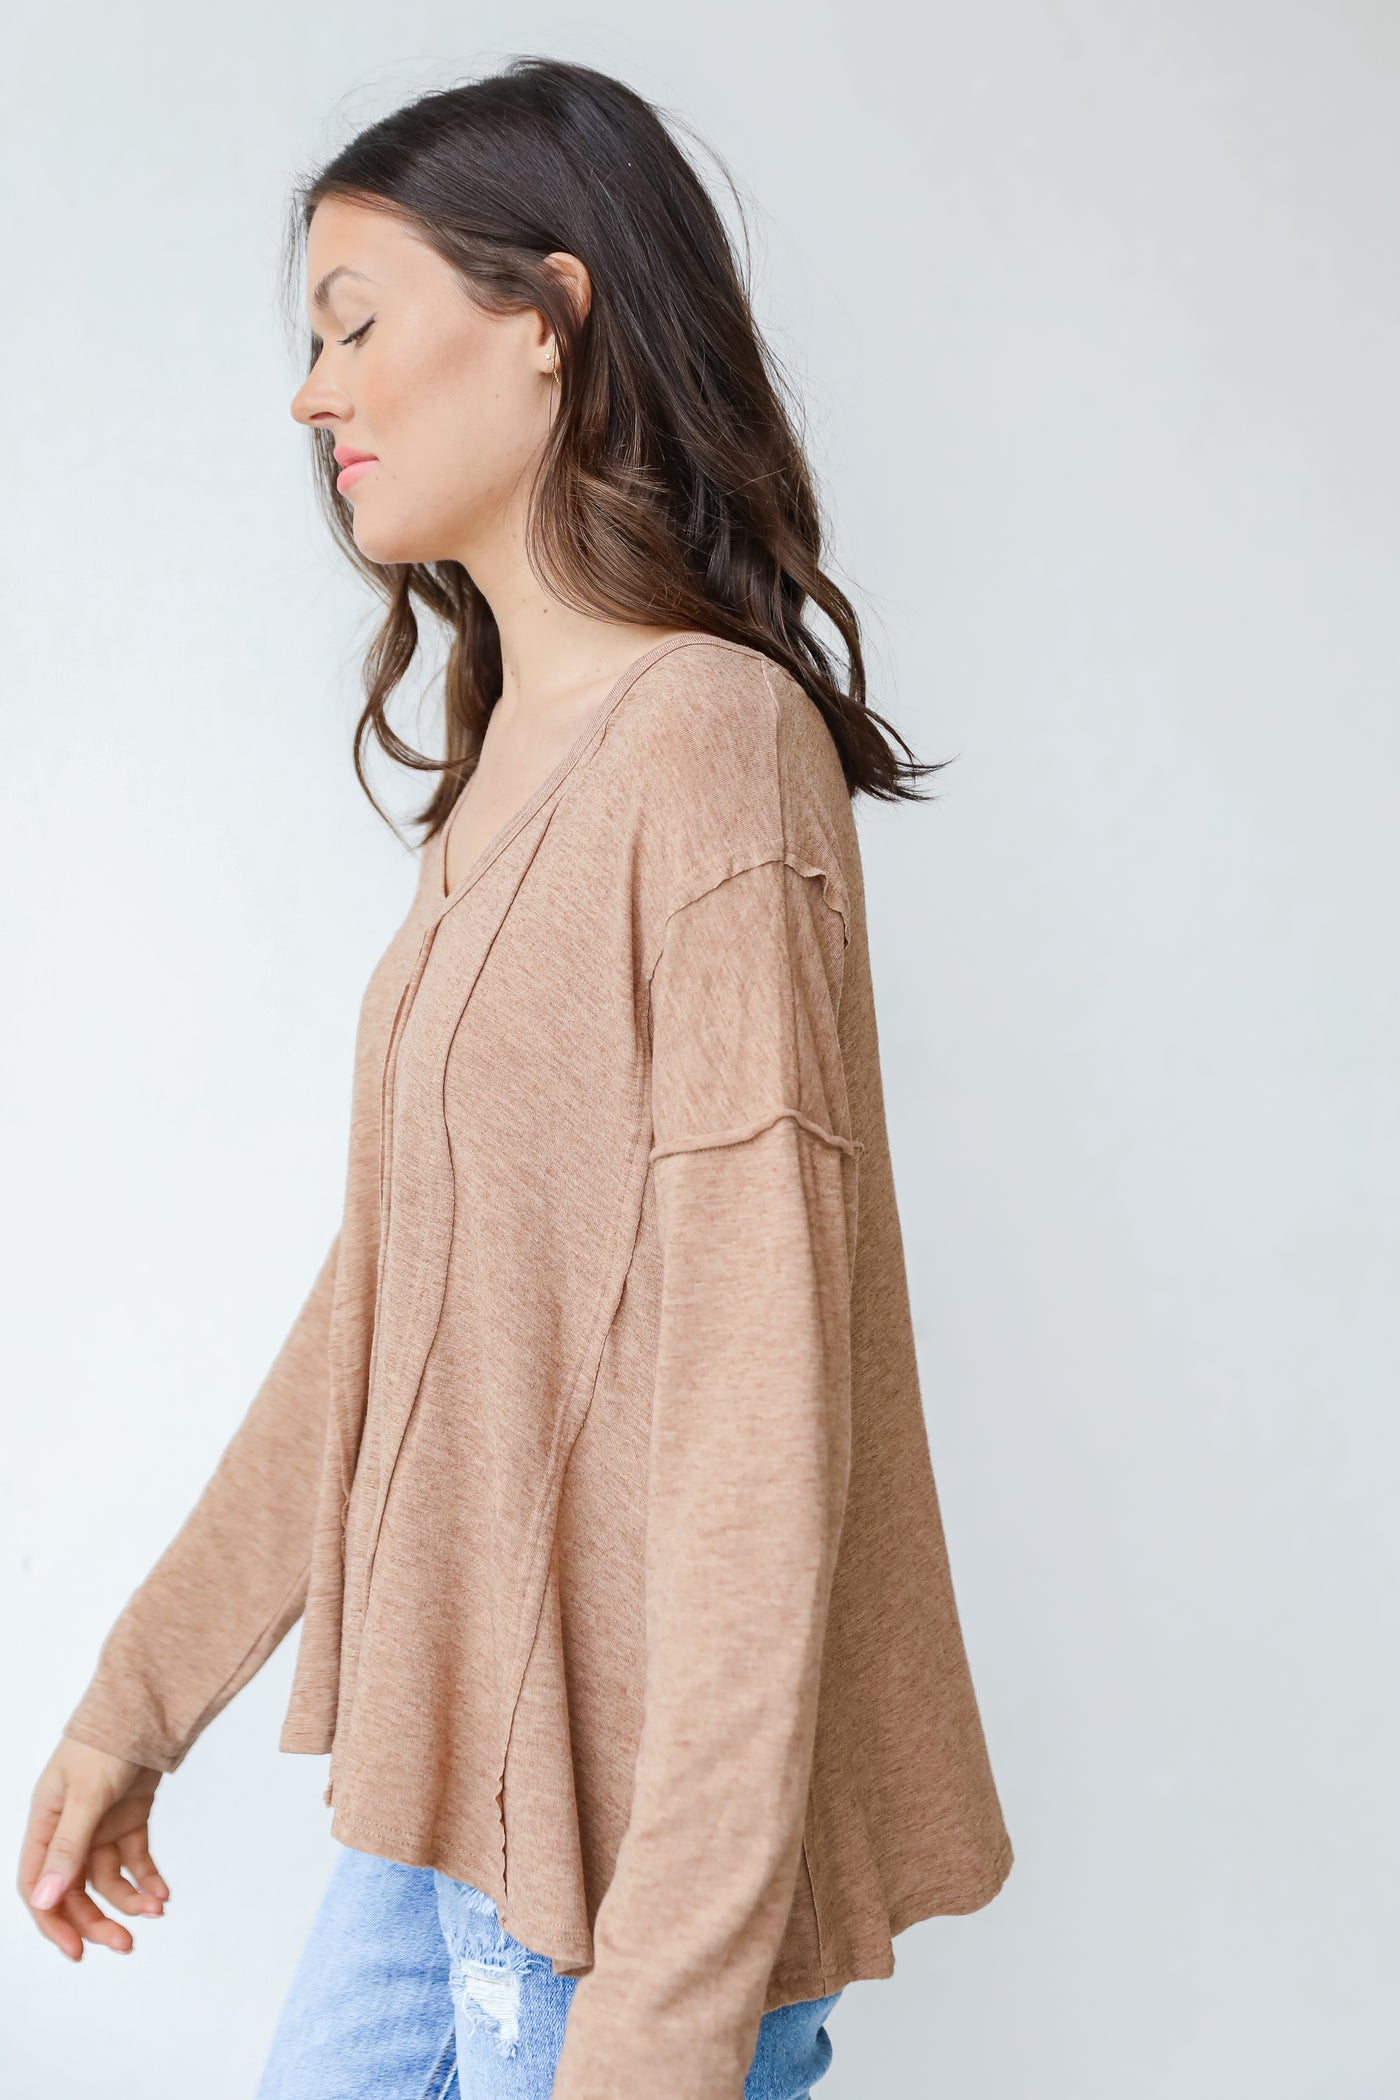 Jersey Knit Top in camel side view